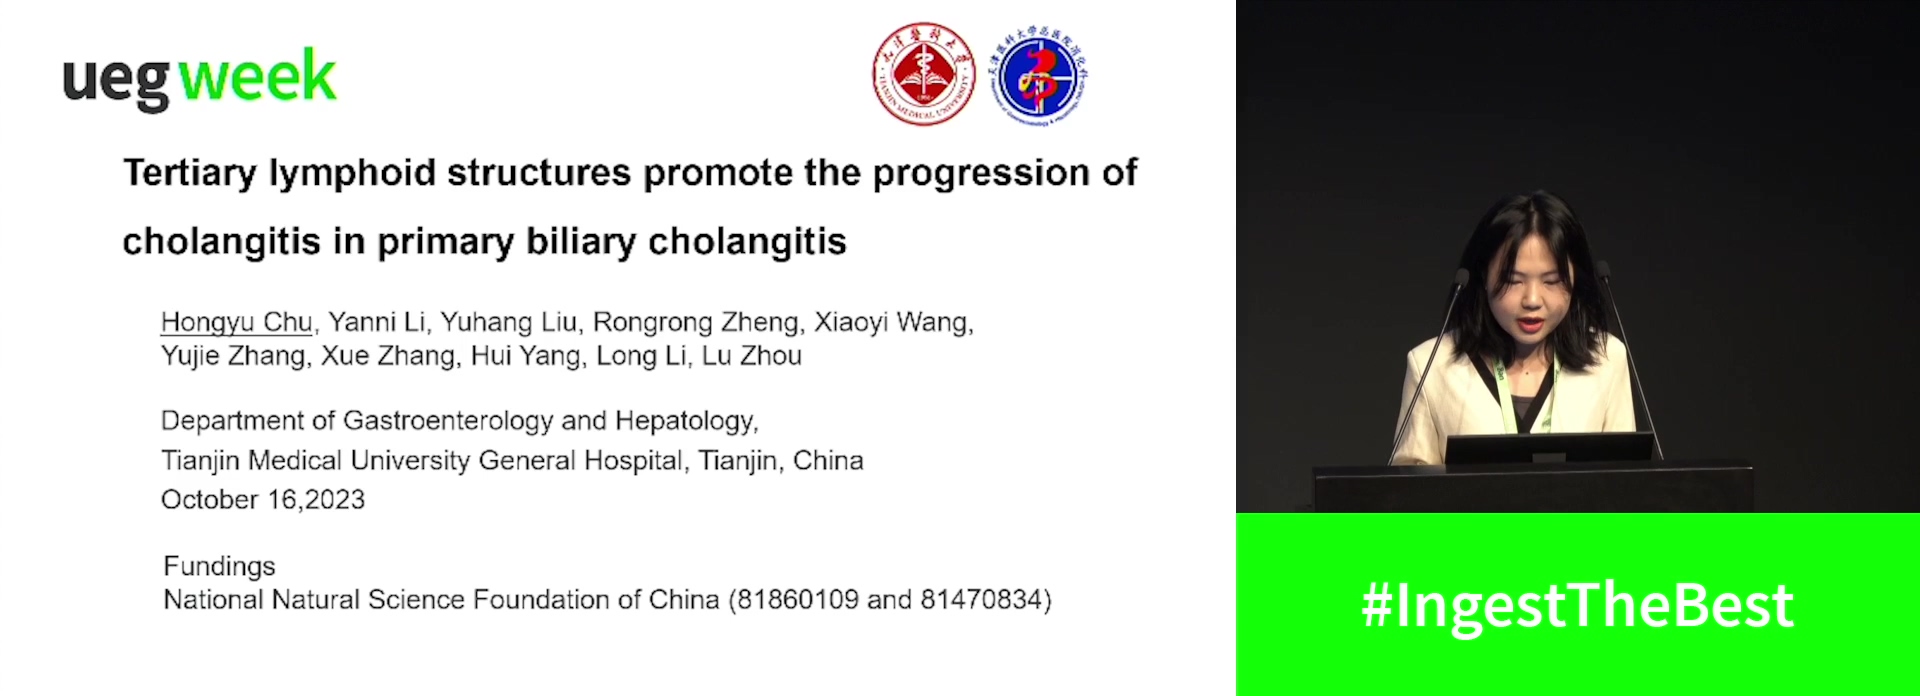 TERTIARY LYMPHOID STRUCTURES PROMOTE THE PROGRESSION OF CHOLANGITIS IN PRIMARY BILIARY CHOLANGITIS